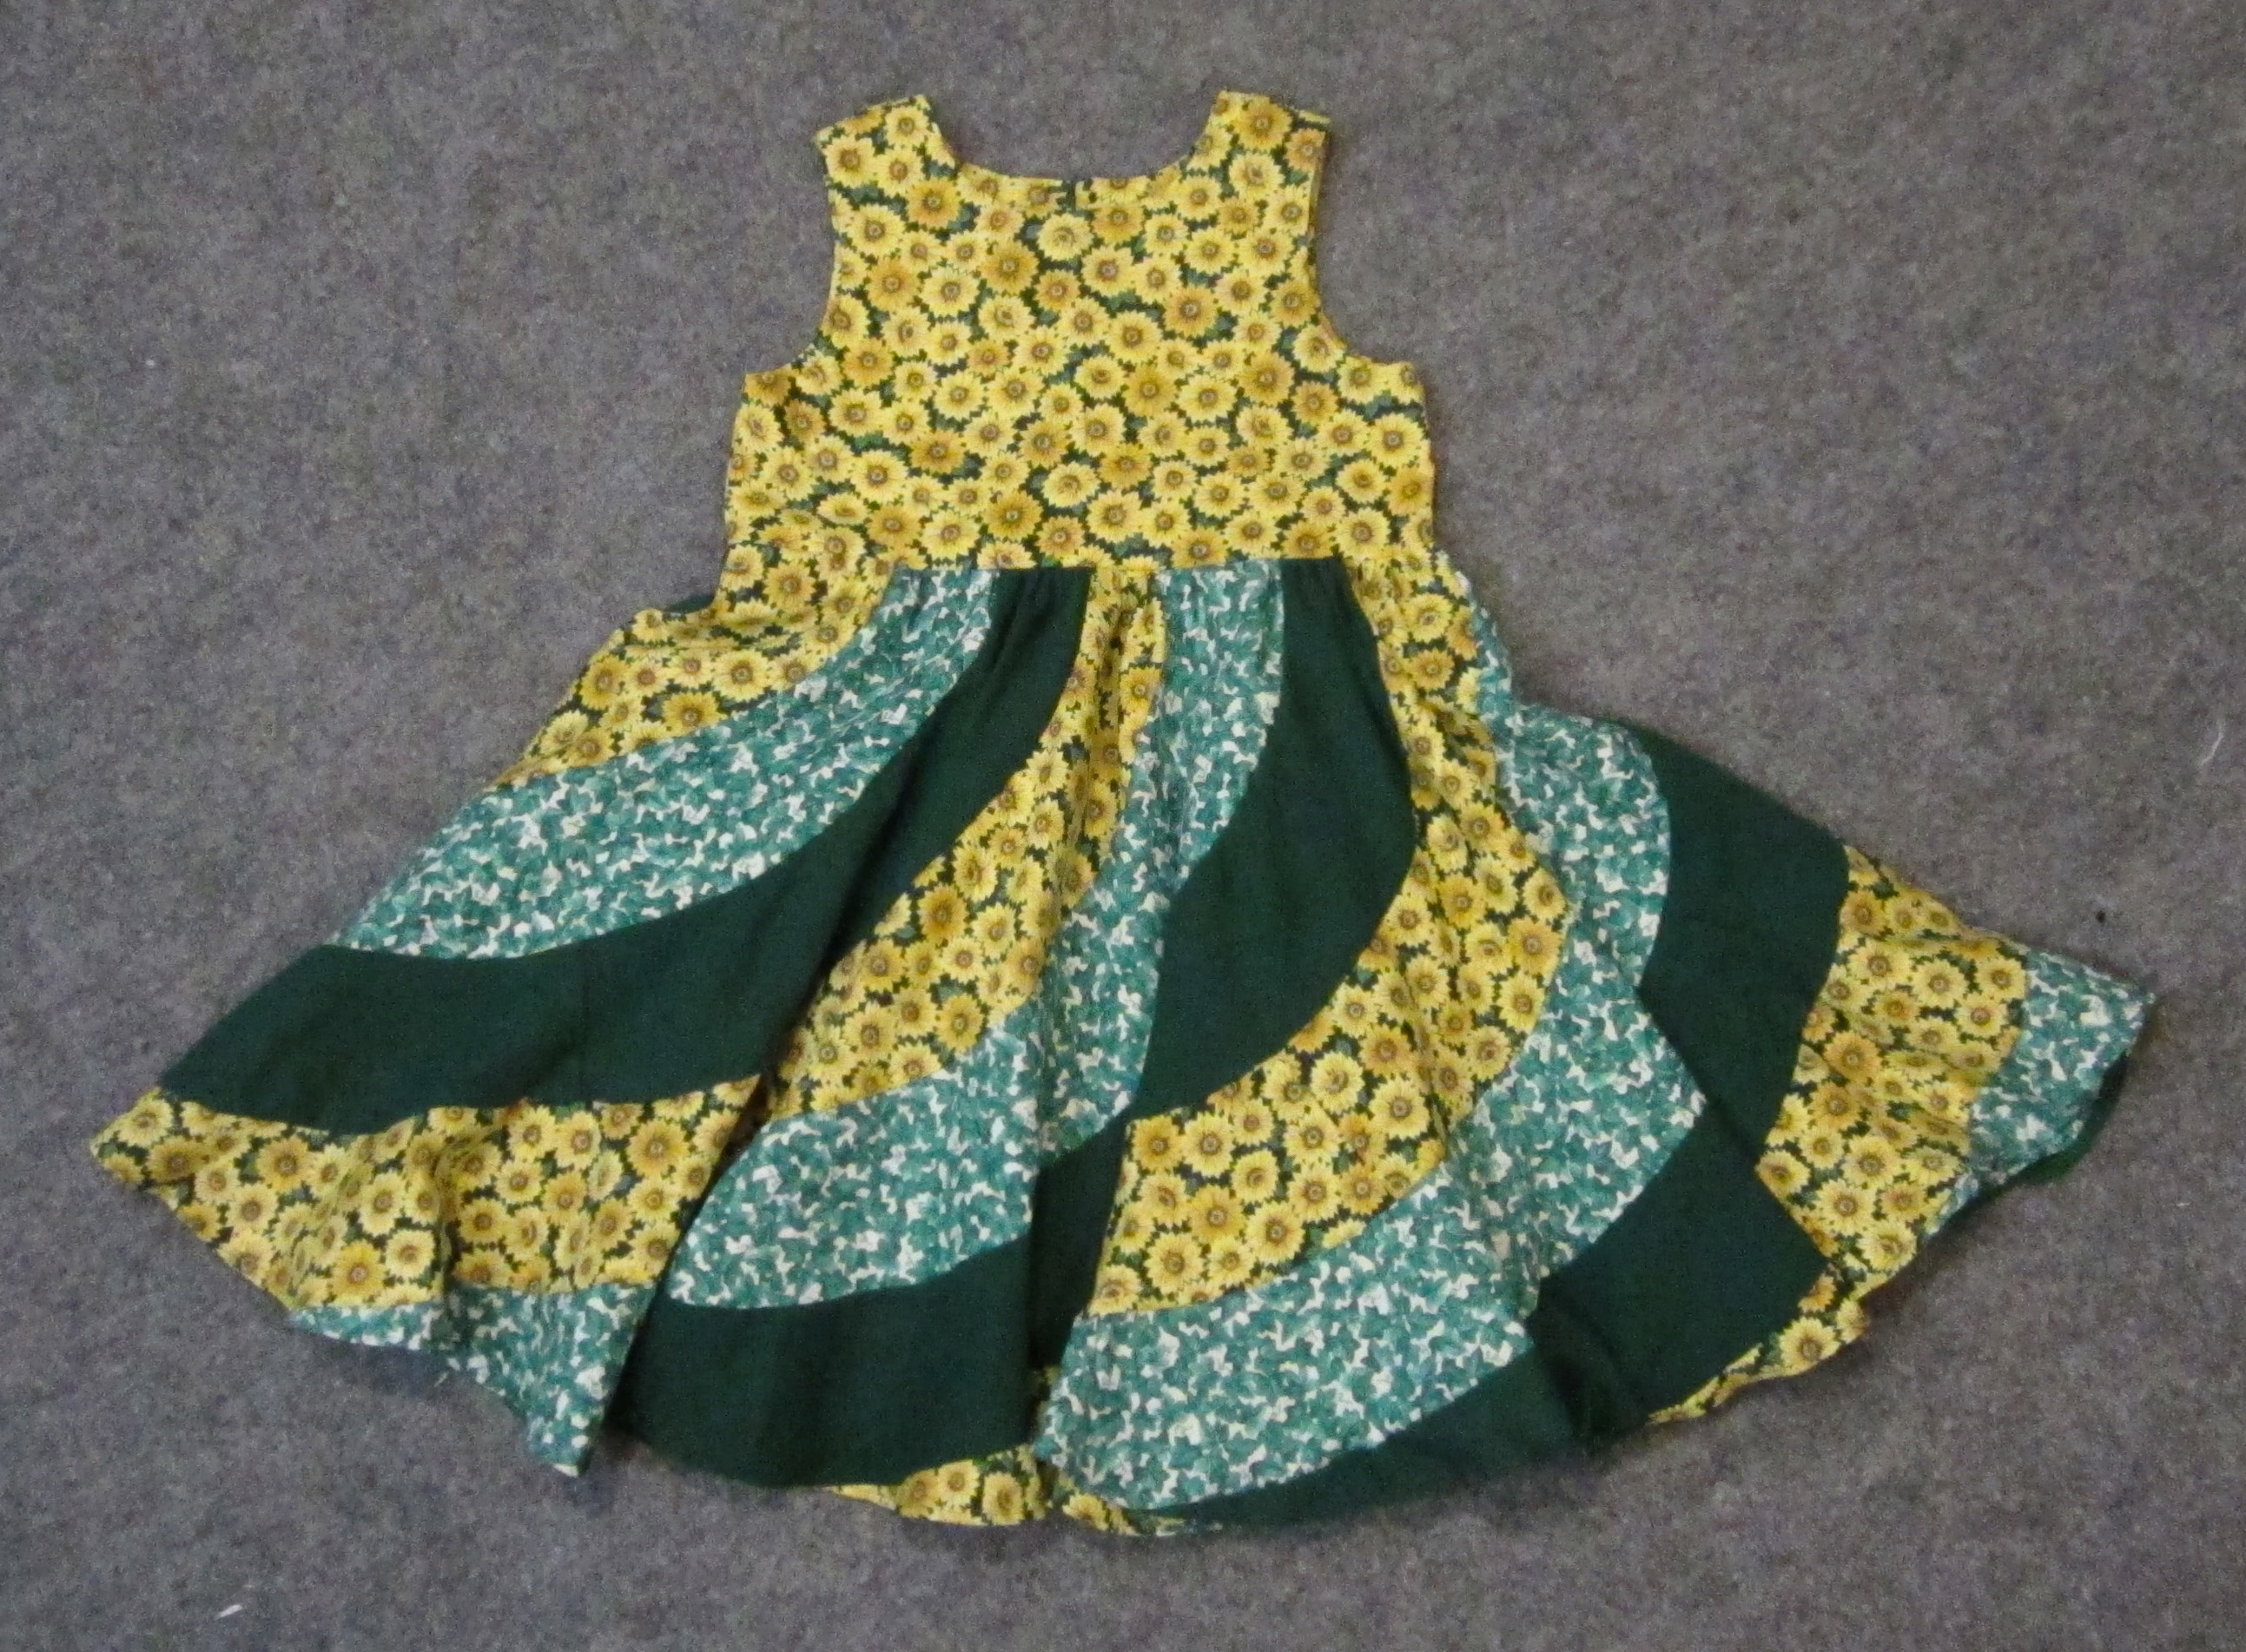 Green and yellow sunflower sleeveless spiral dress for a young girl